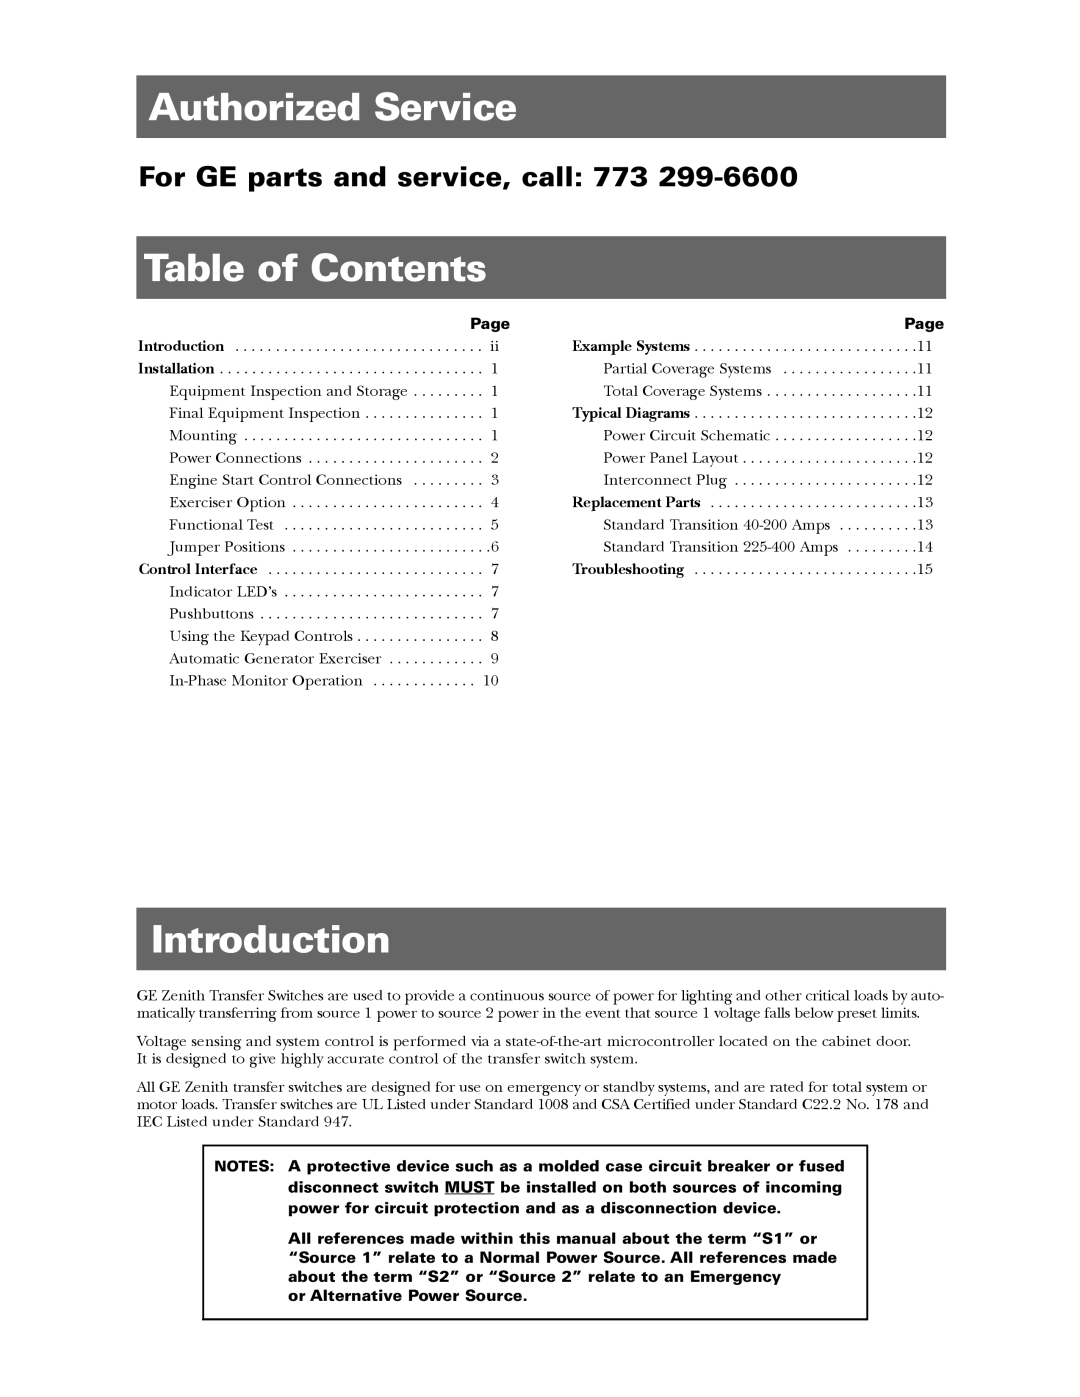 GE ZTX manual Authorized Service, Table of Contents, Introduction, For GE parts and service, call, Page 